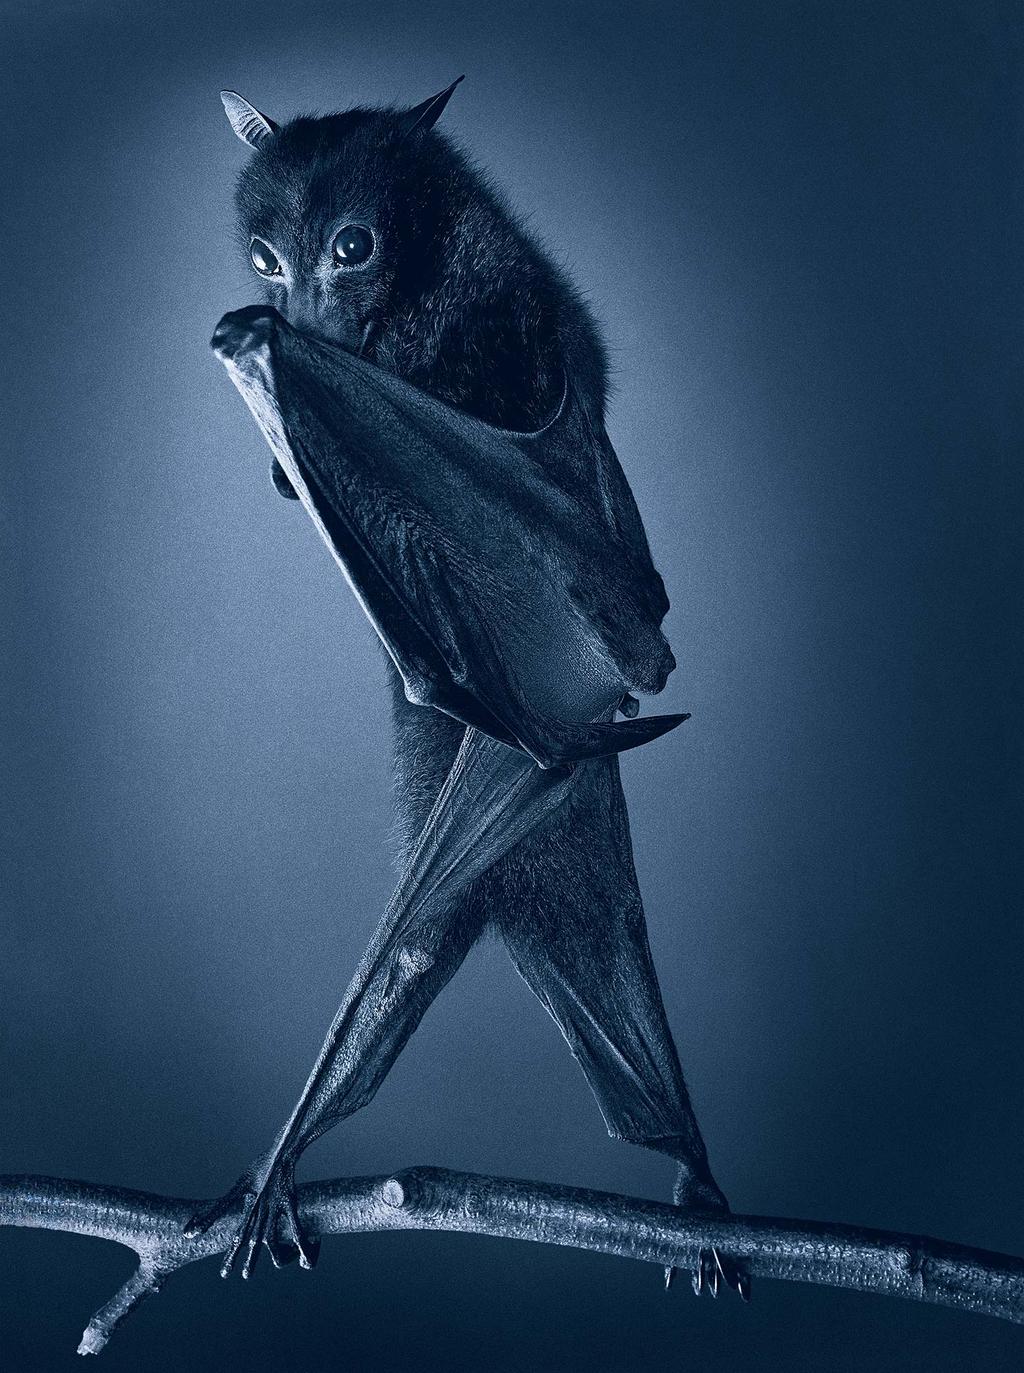 Tim Flach More Than Human - Extended Text Good Bat / Bad Bat Bats have inspired many stories throughout the world, and through history.